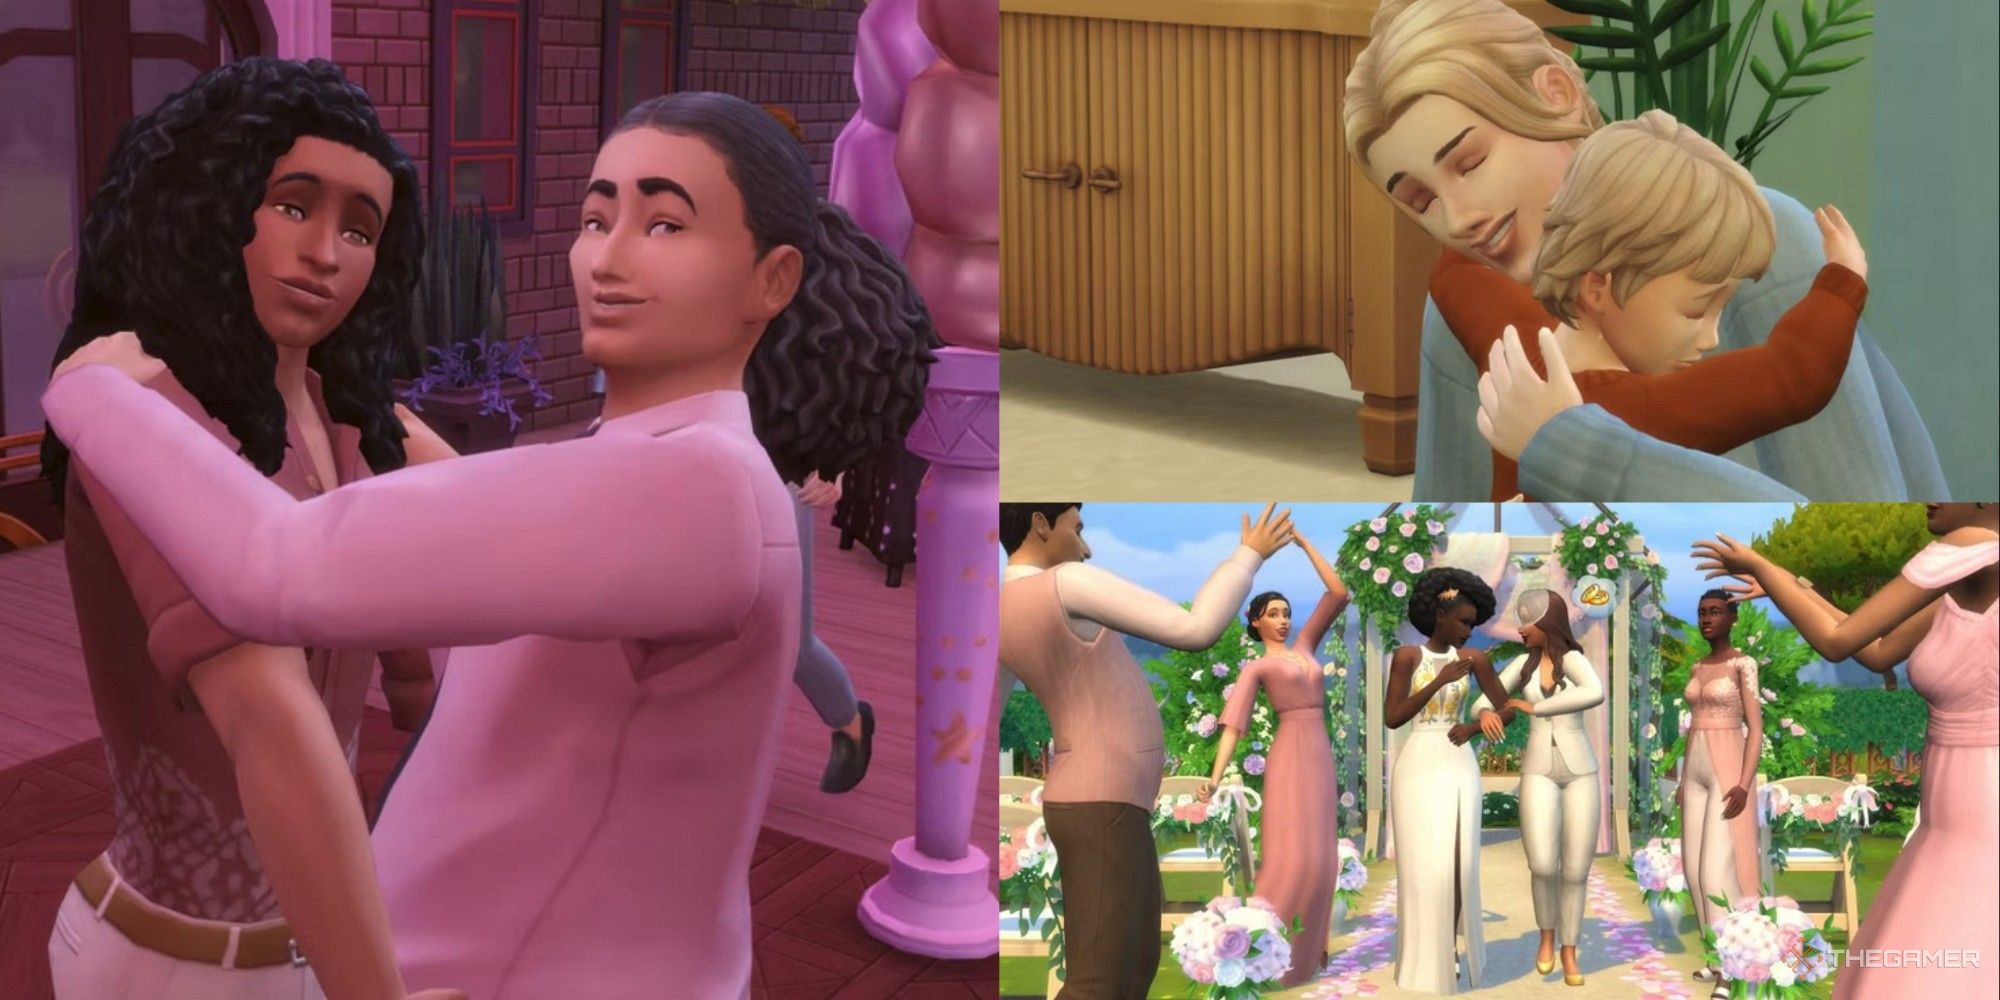 All Relationship Cheats For The Sims 4